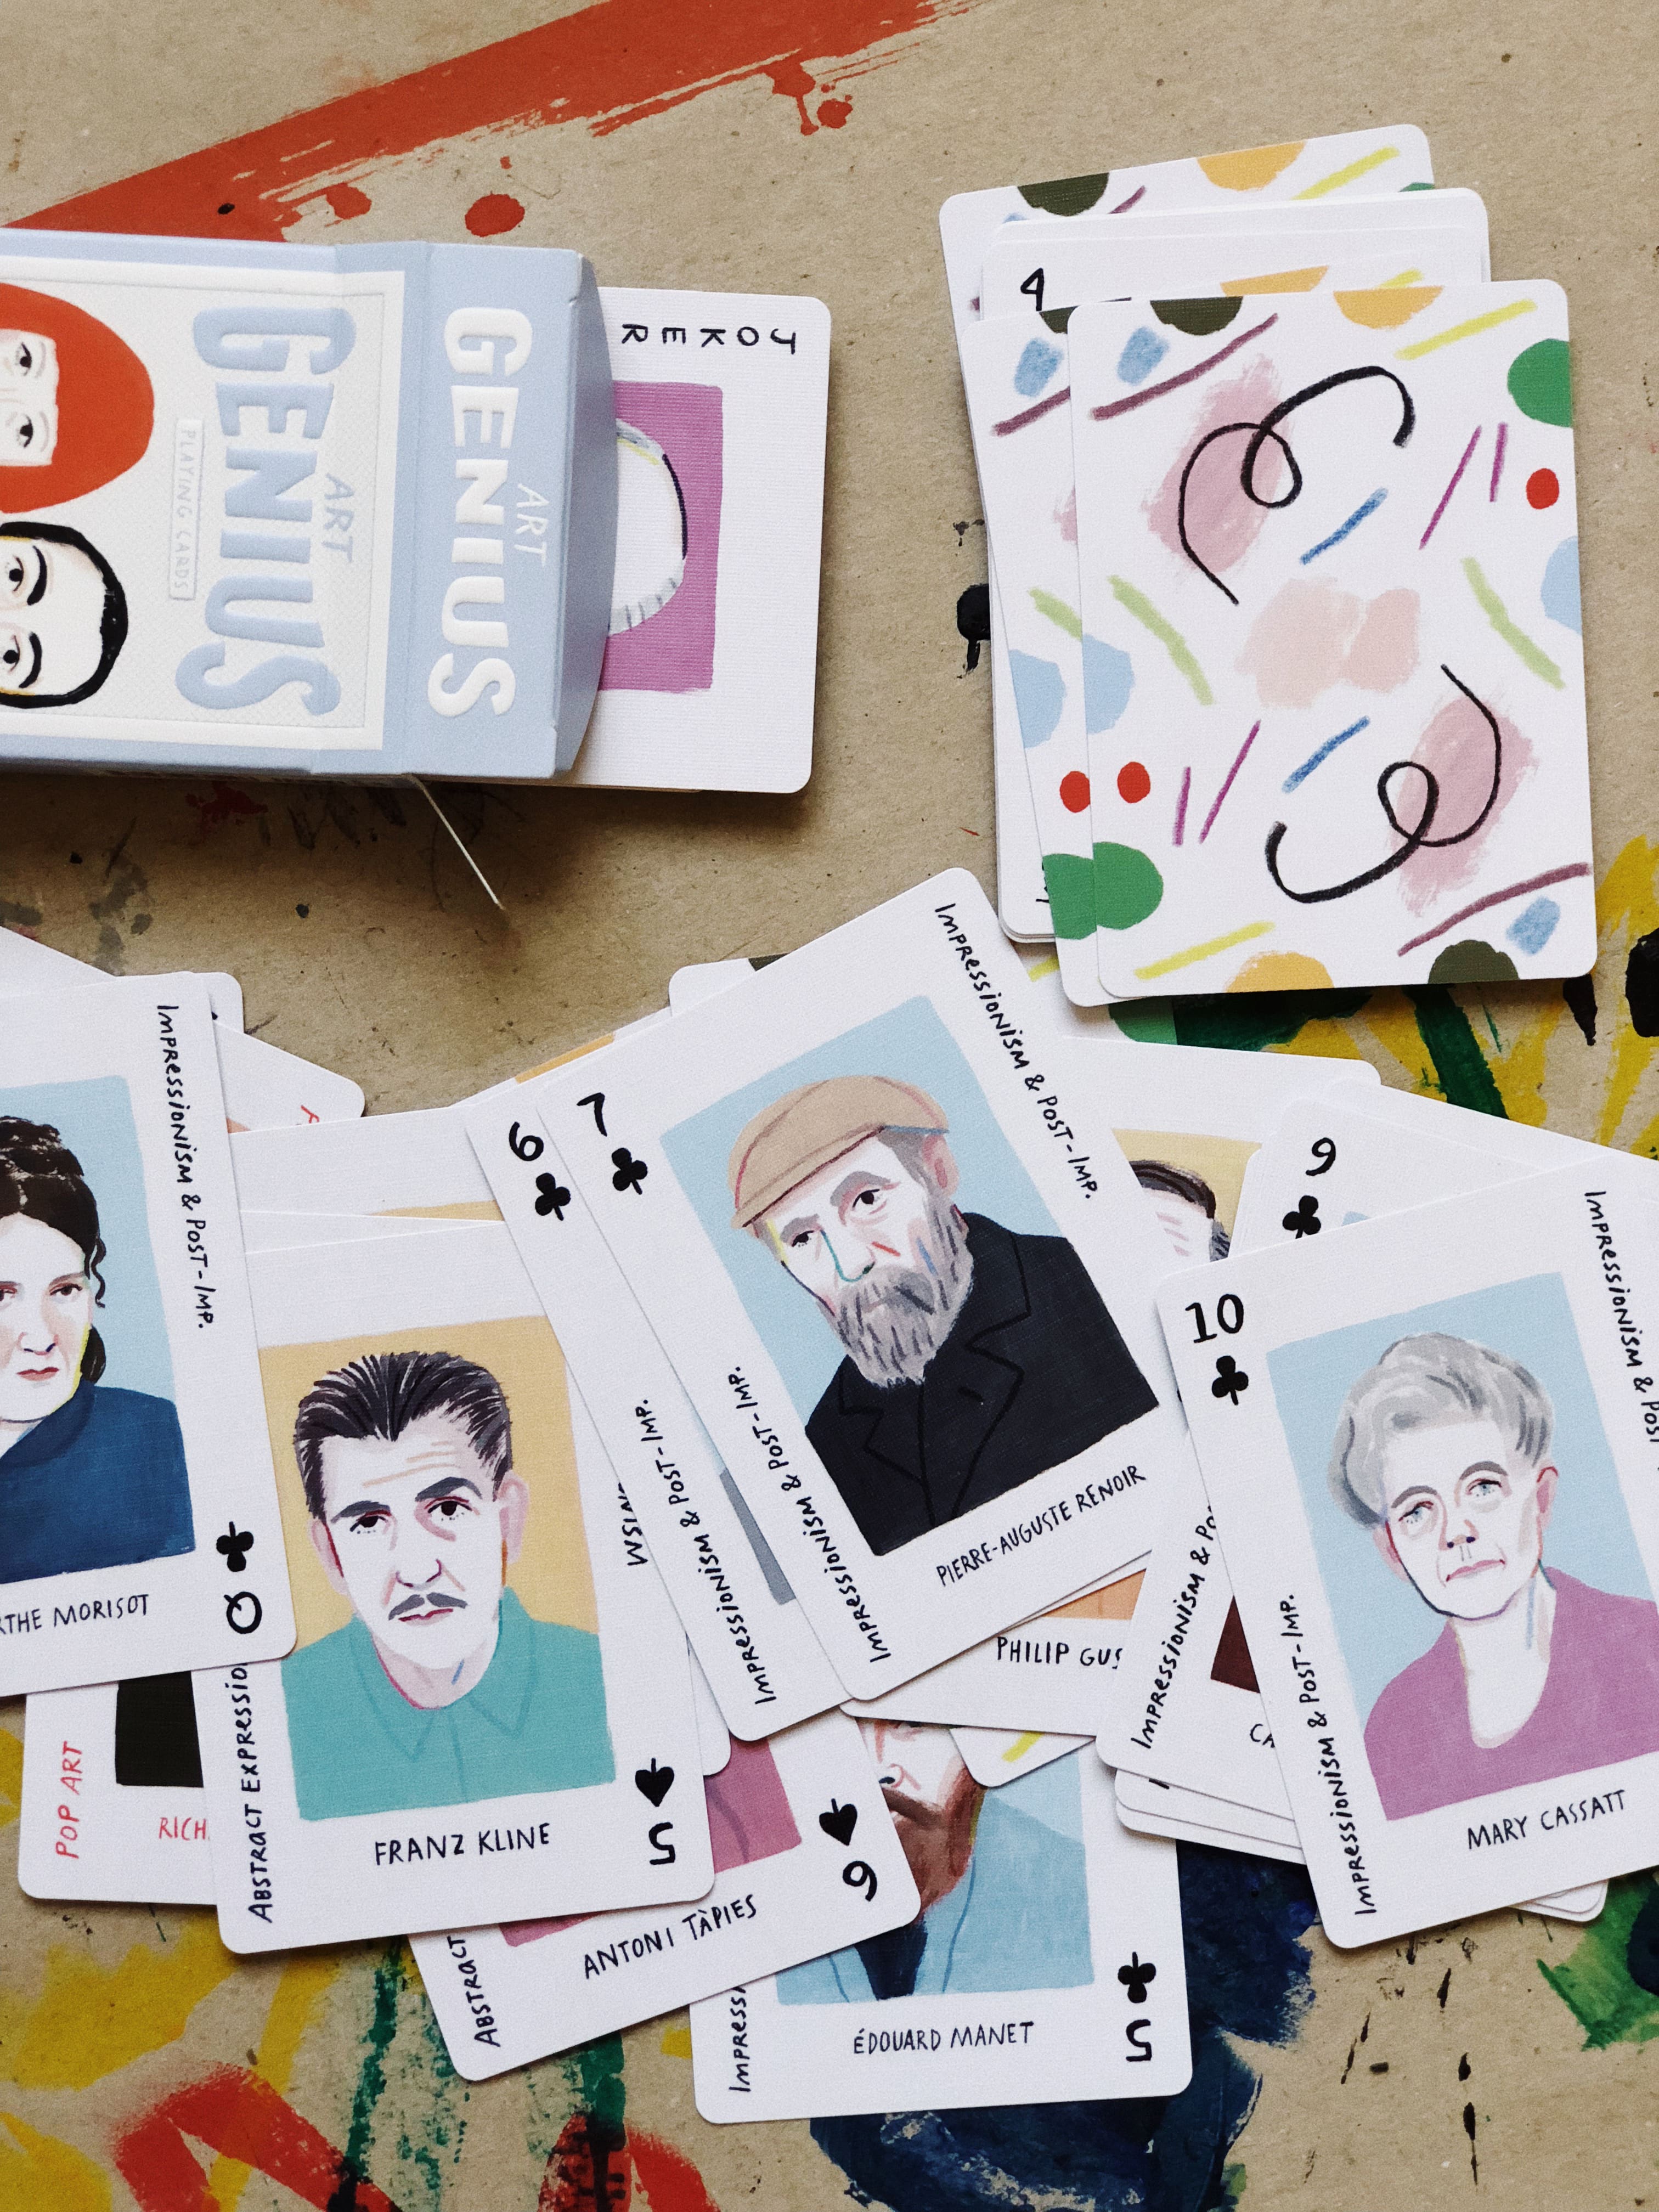 ART playing Cards